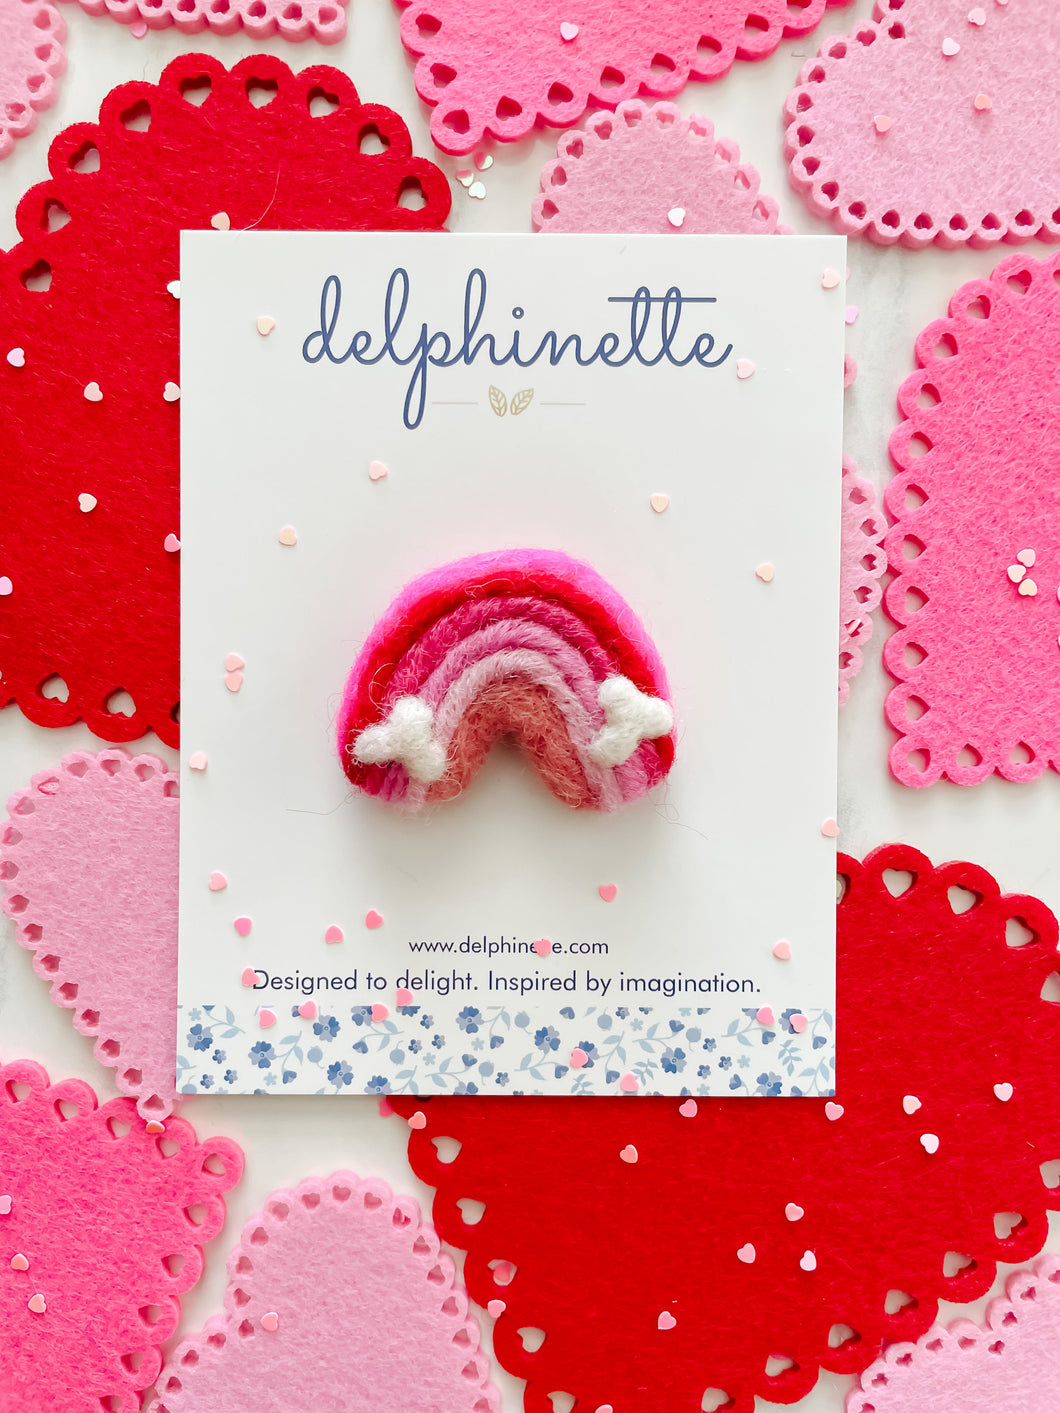 delphinette handmade felt little girl/baby girl hair accessory - a little pink and red gradient rainbow that can be customized as a hair clip, headband or hair tie. Handmade in Canada.